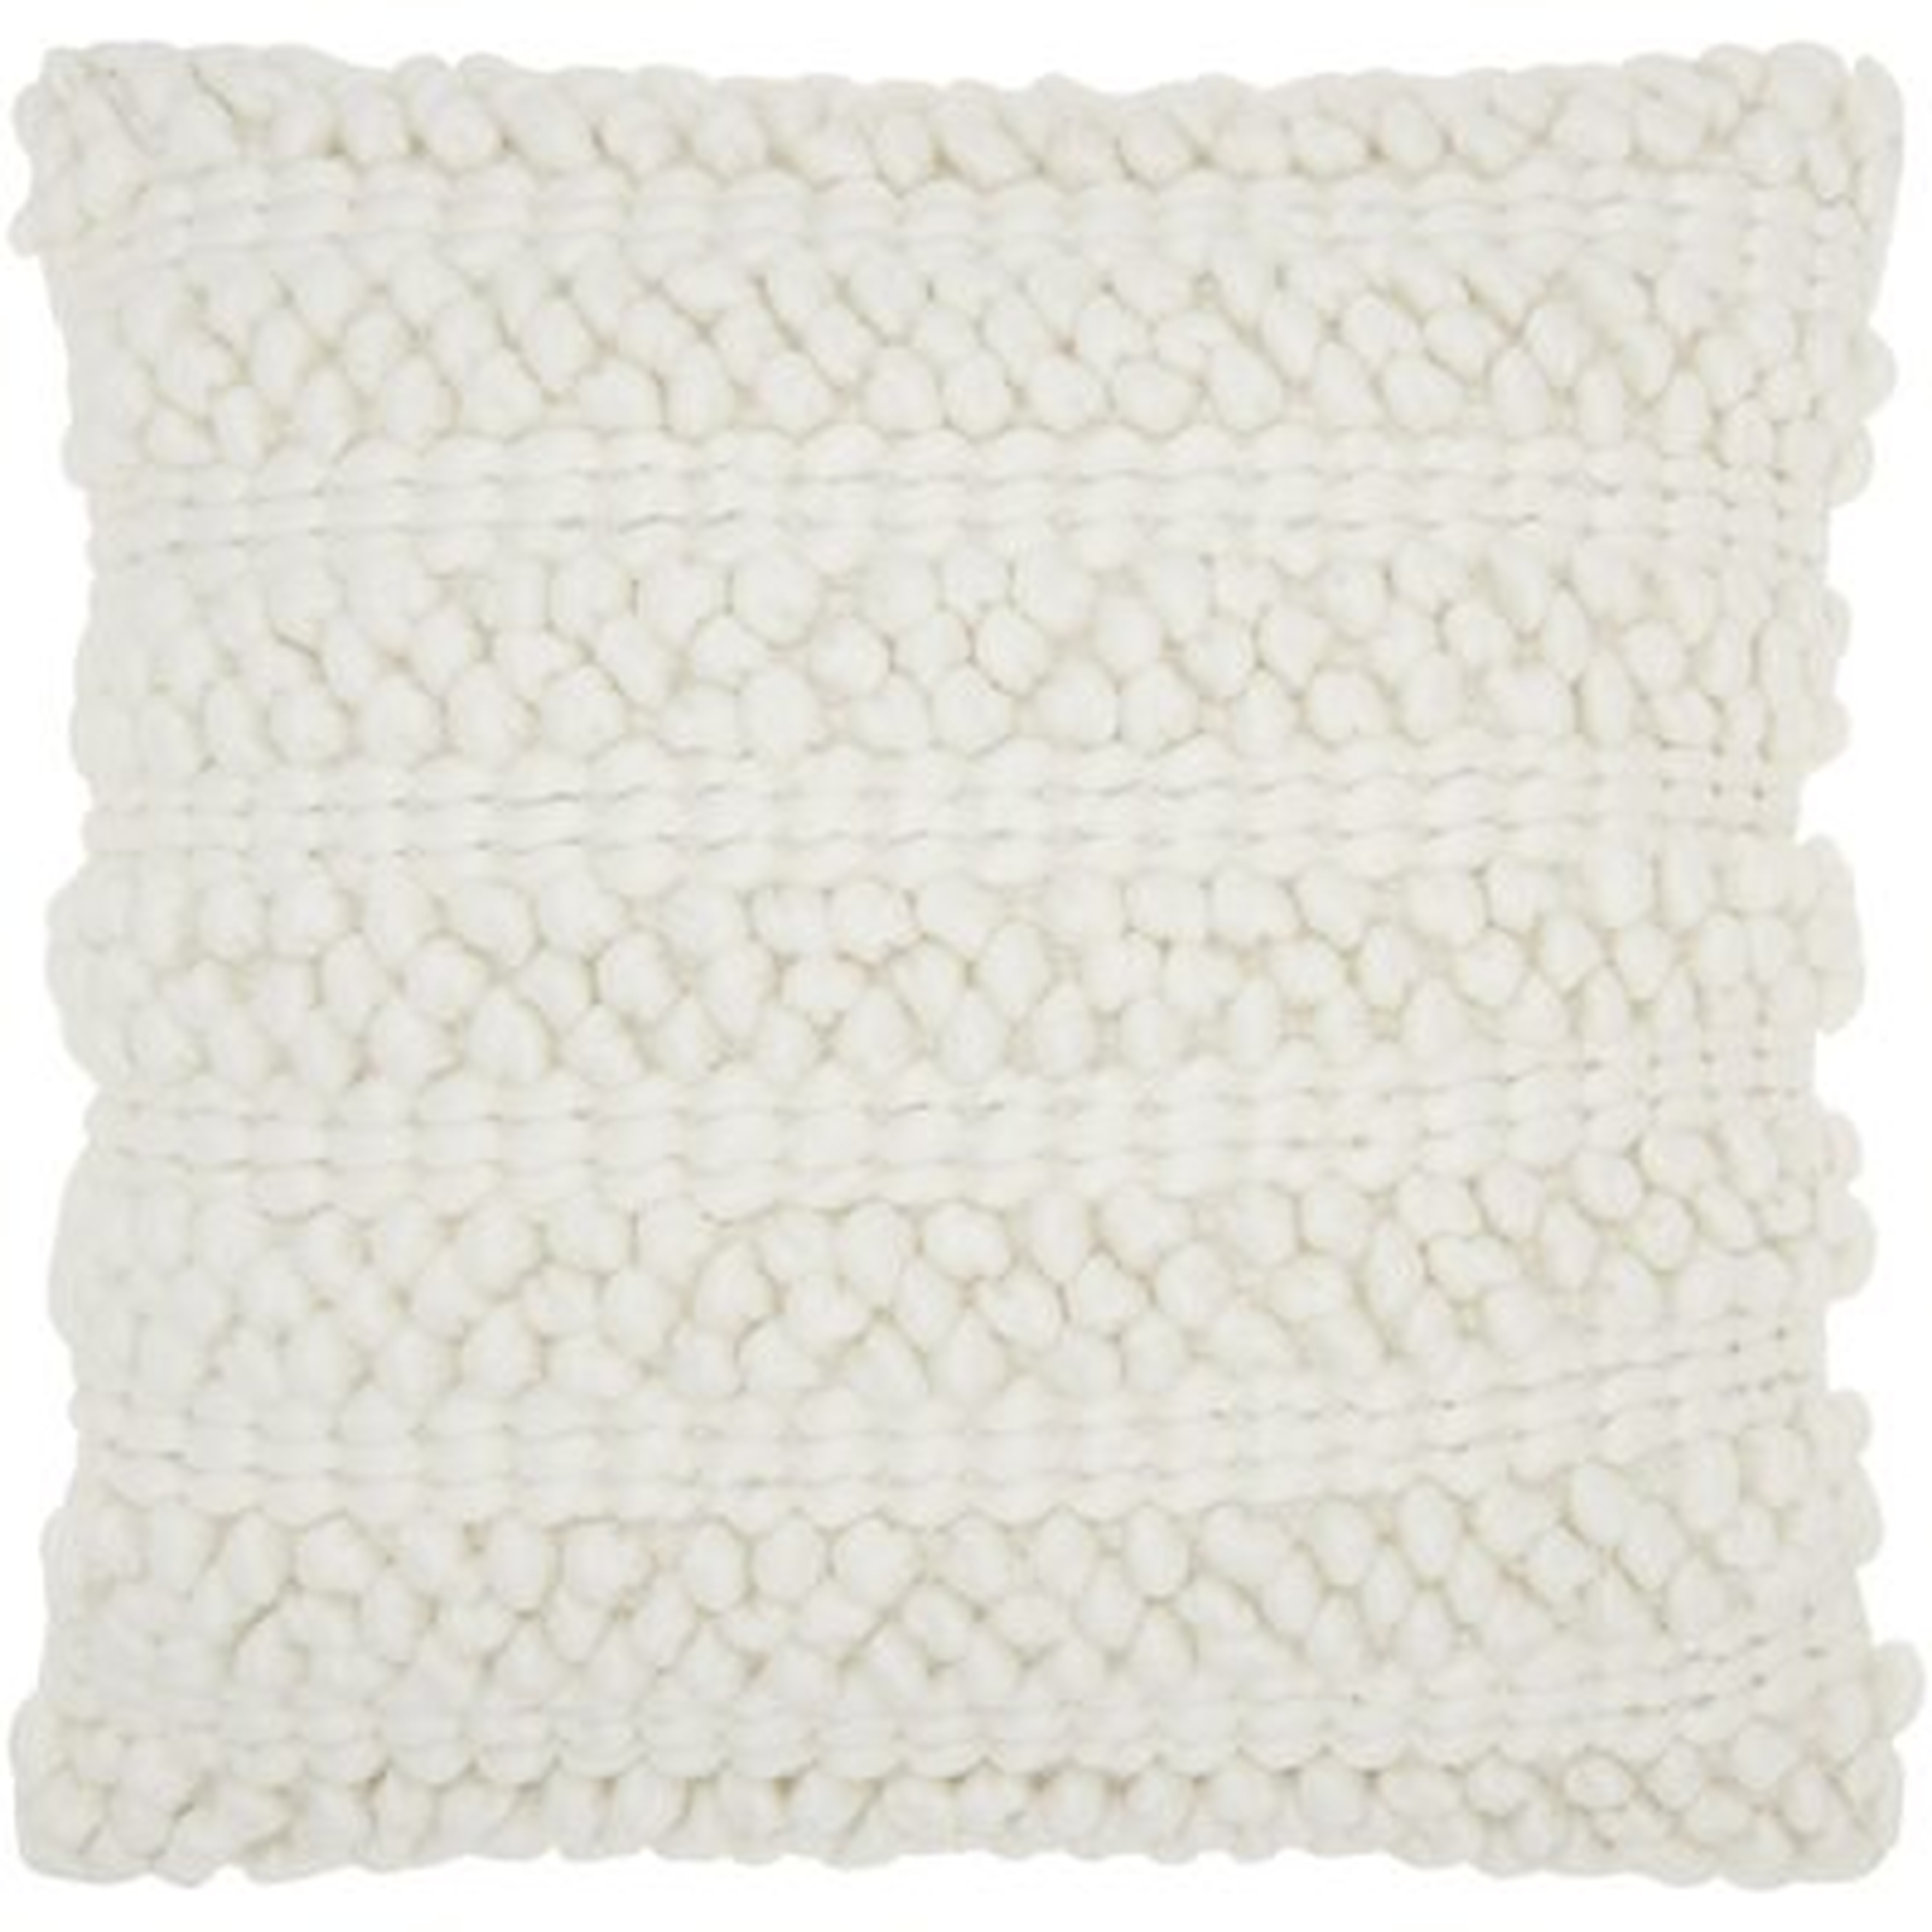 Demorest Square Pillow Cover and Insert - AllModern